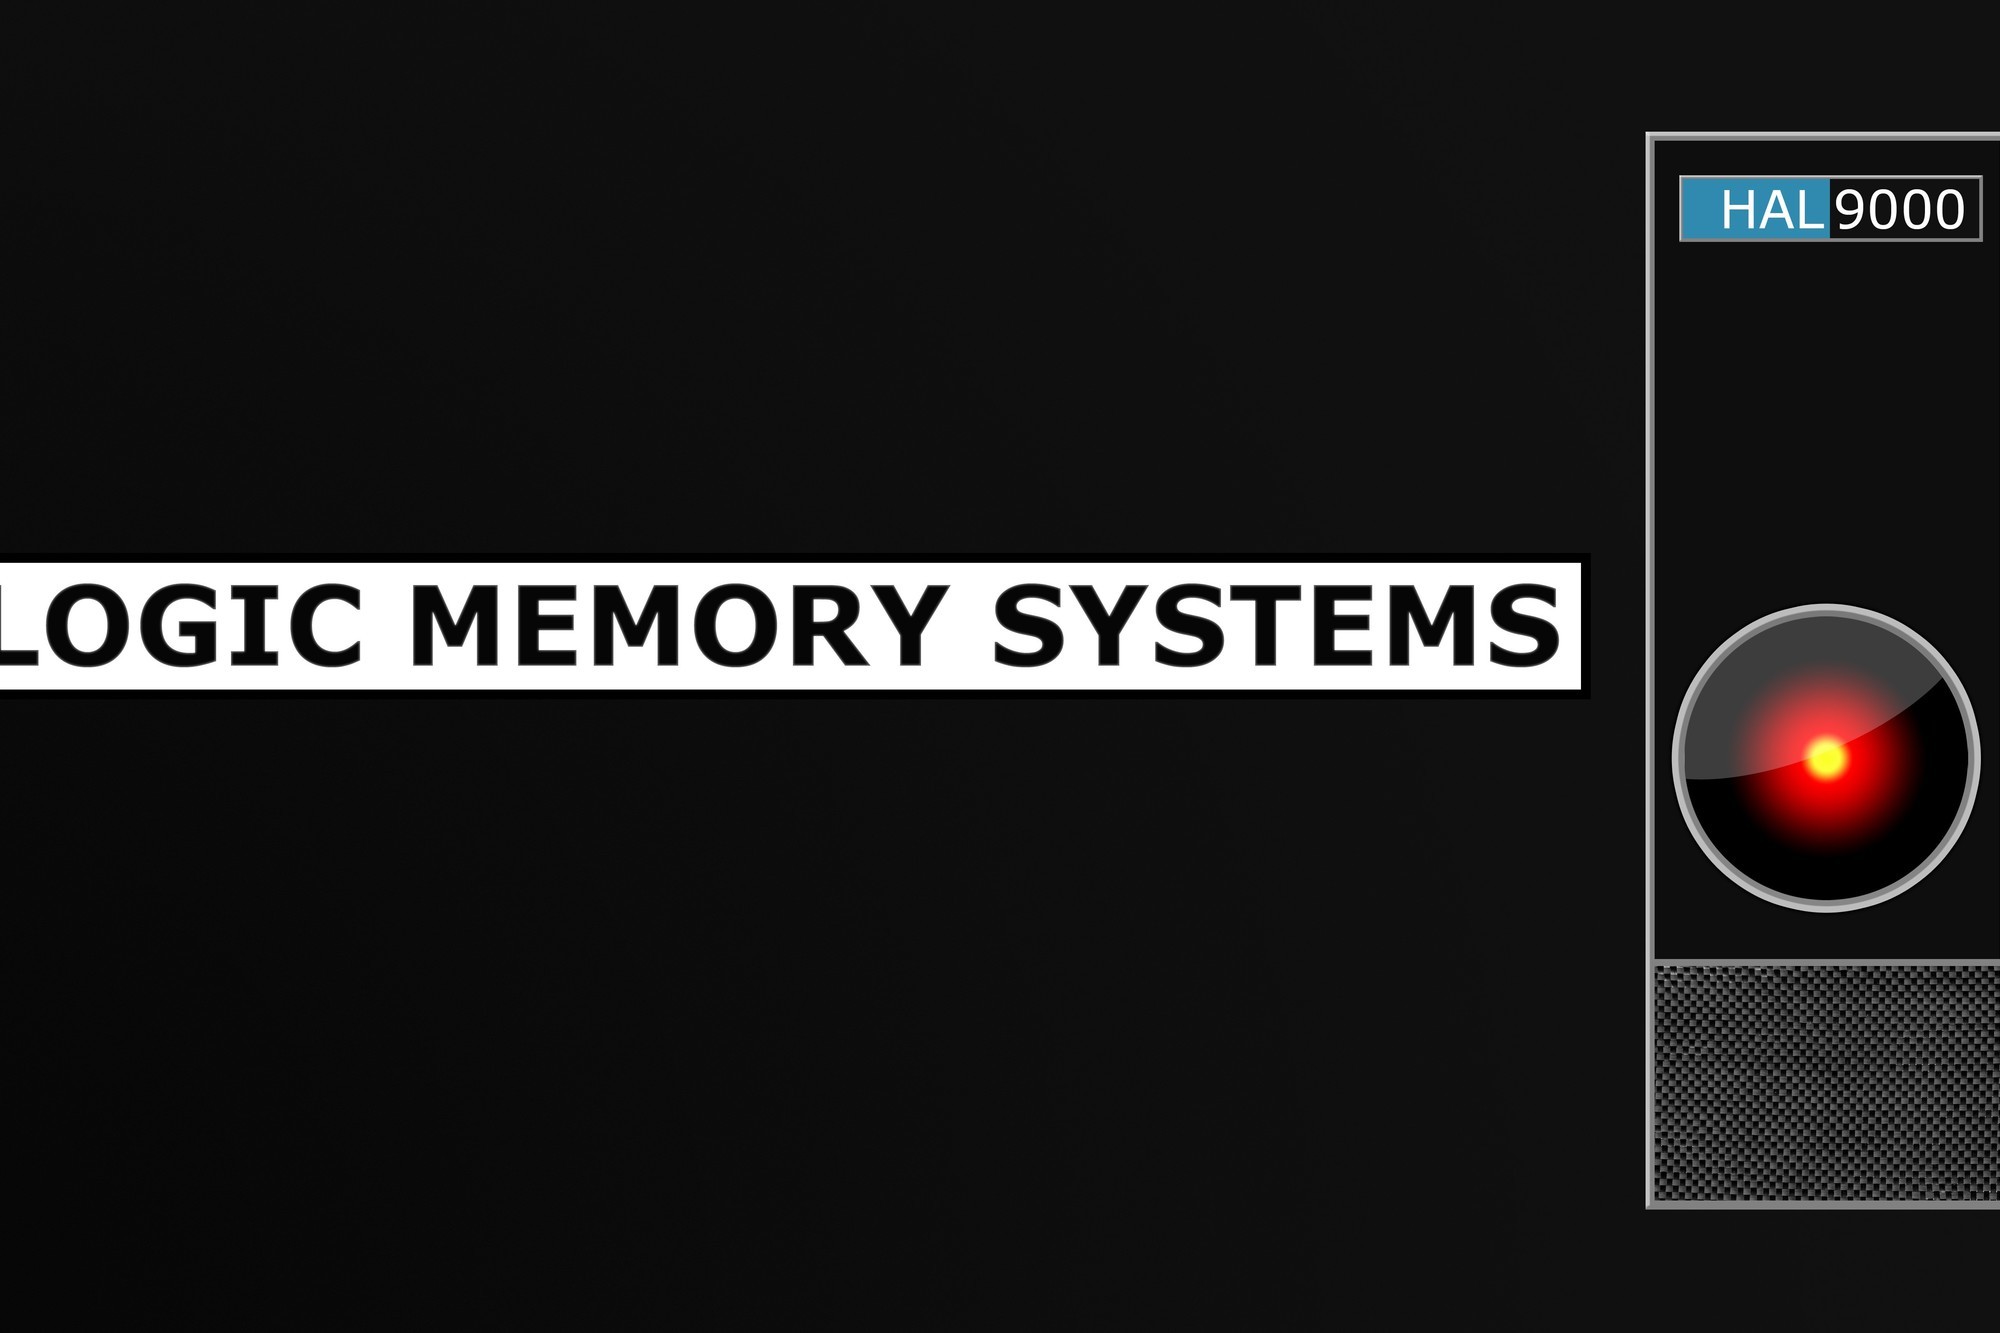 2000x1333 2001: a space odyssey hal9000 logic memory systems .